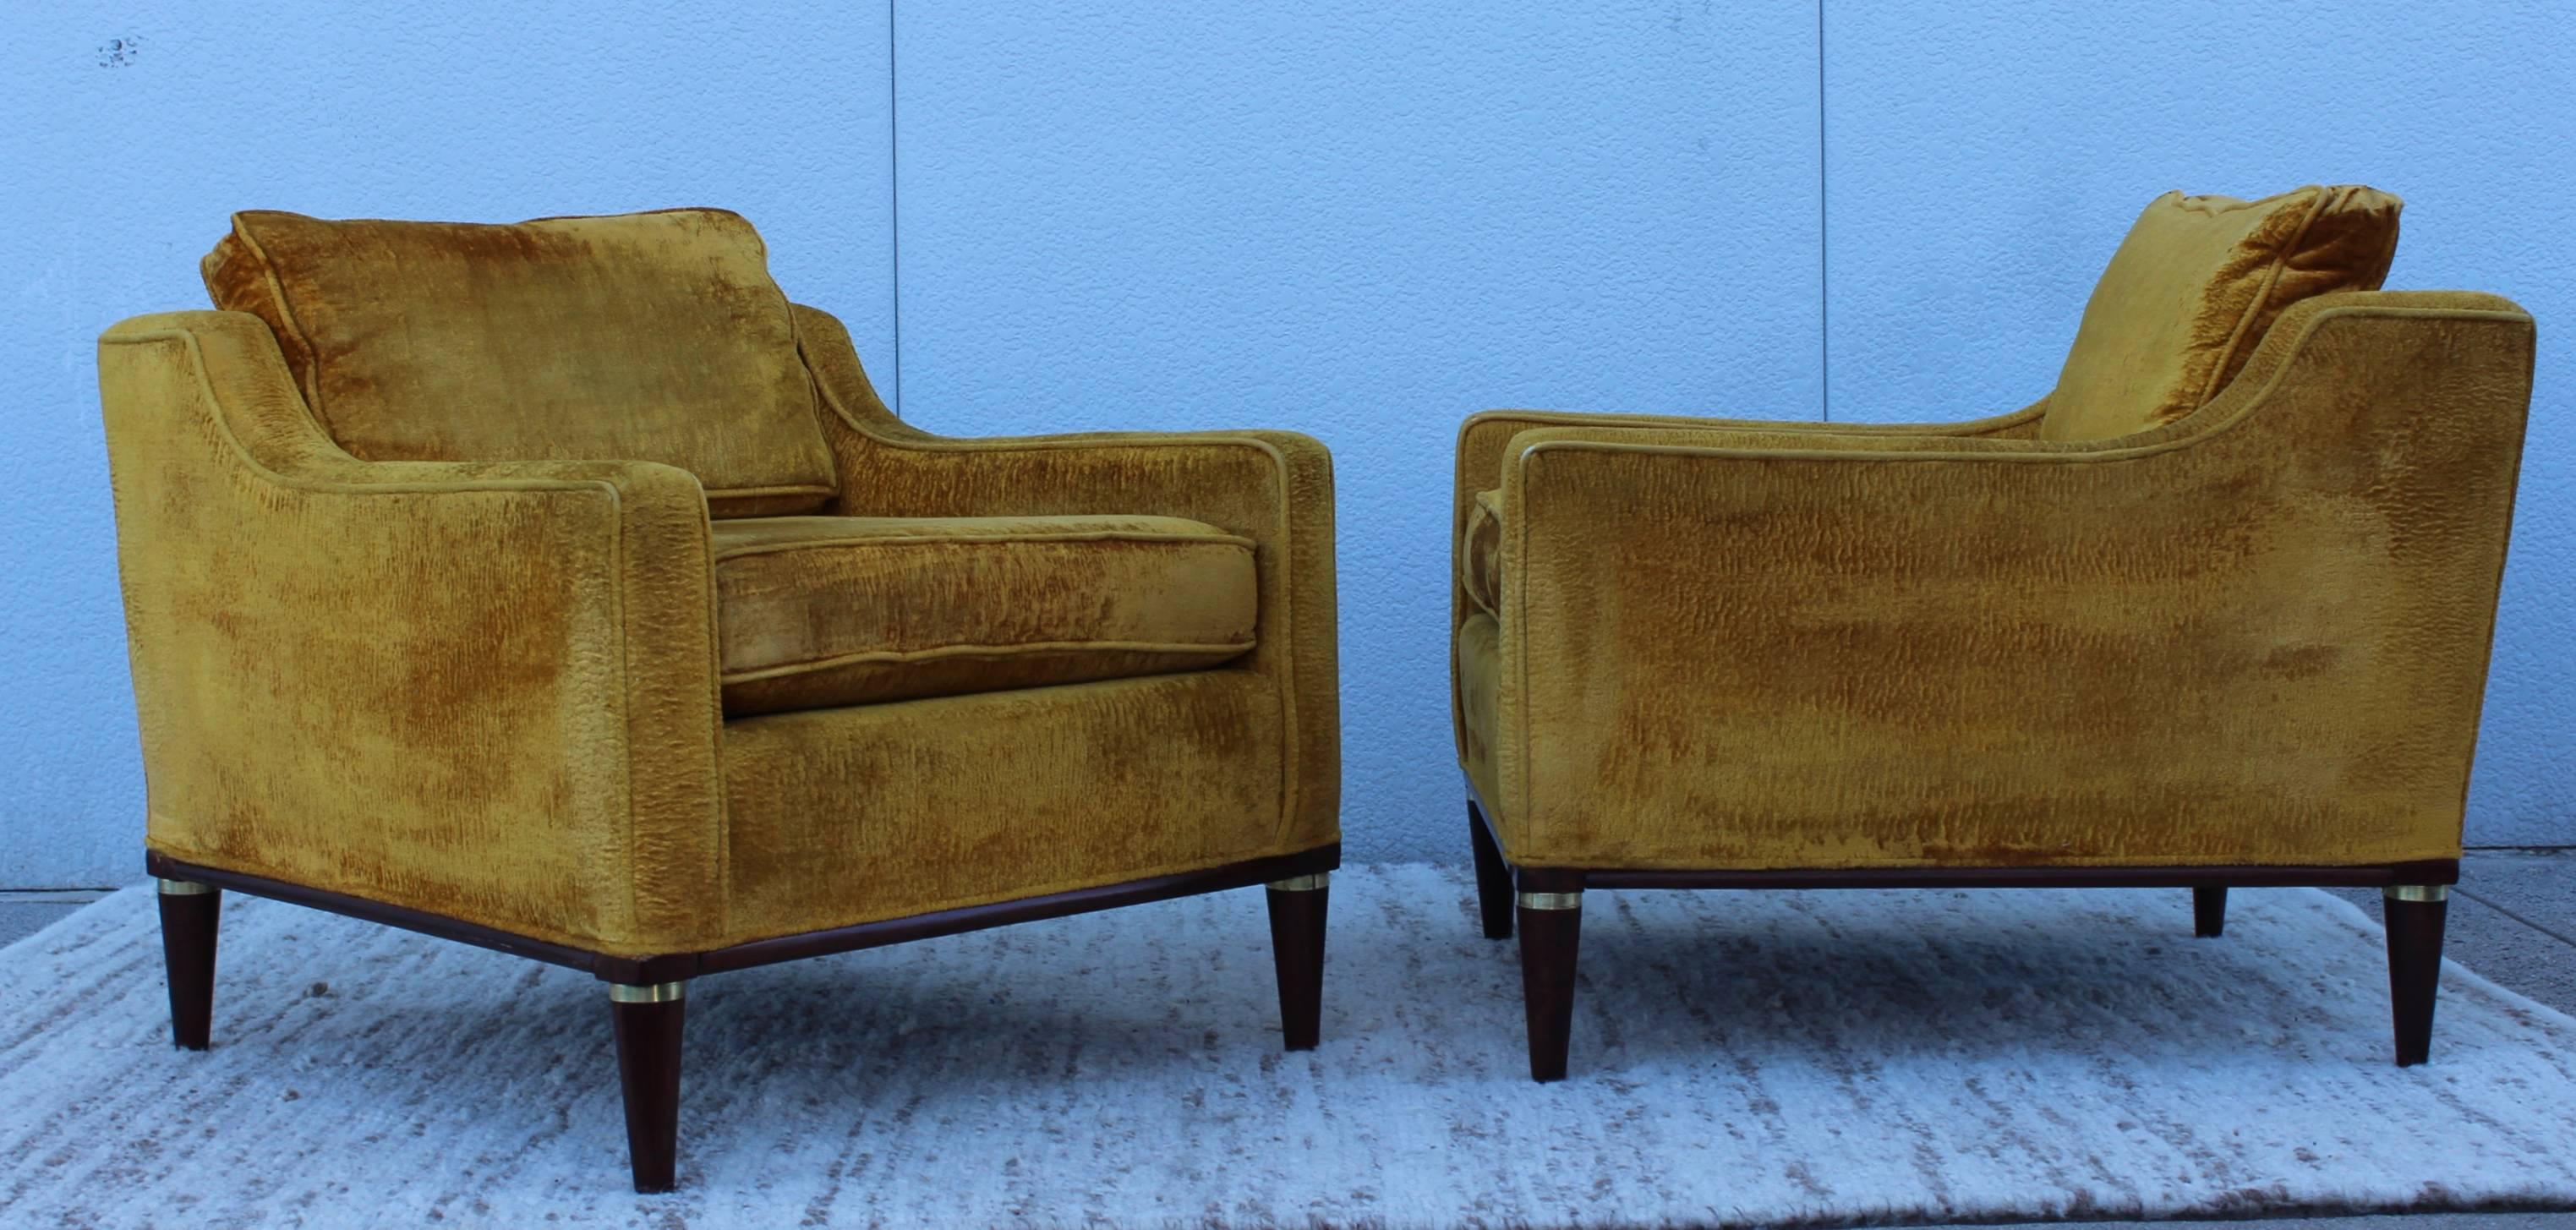 Stunning pair of 1950s low back lounge chairs with wood base and brass ring detail, in vintage original upholstery. 

They need new upholstery.